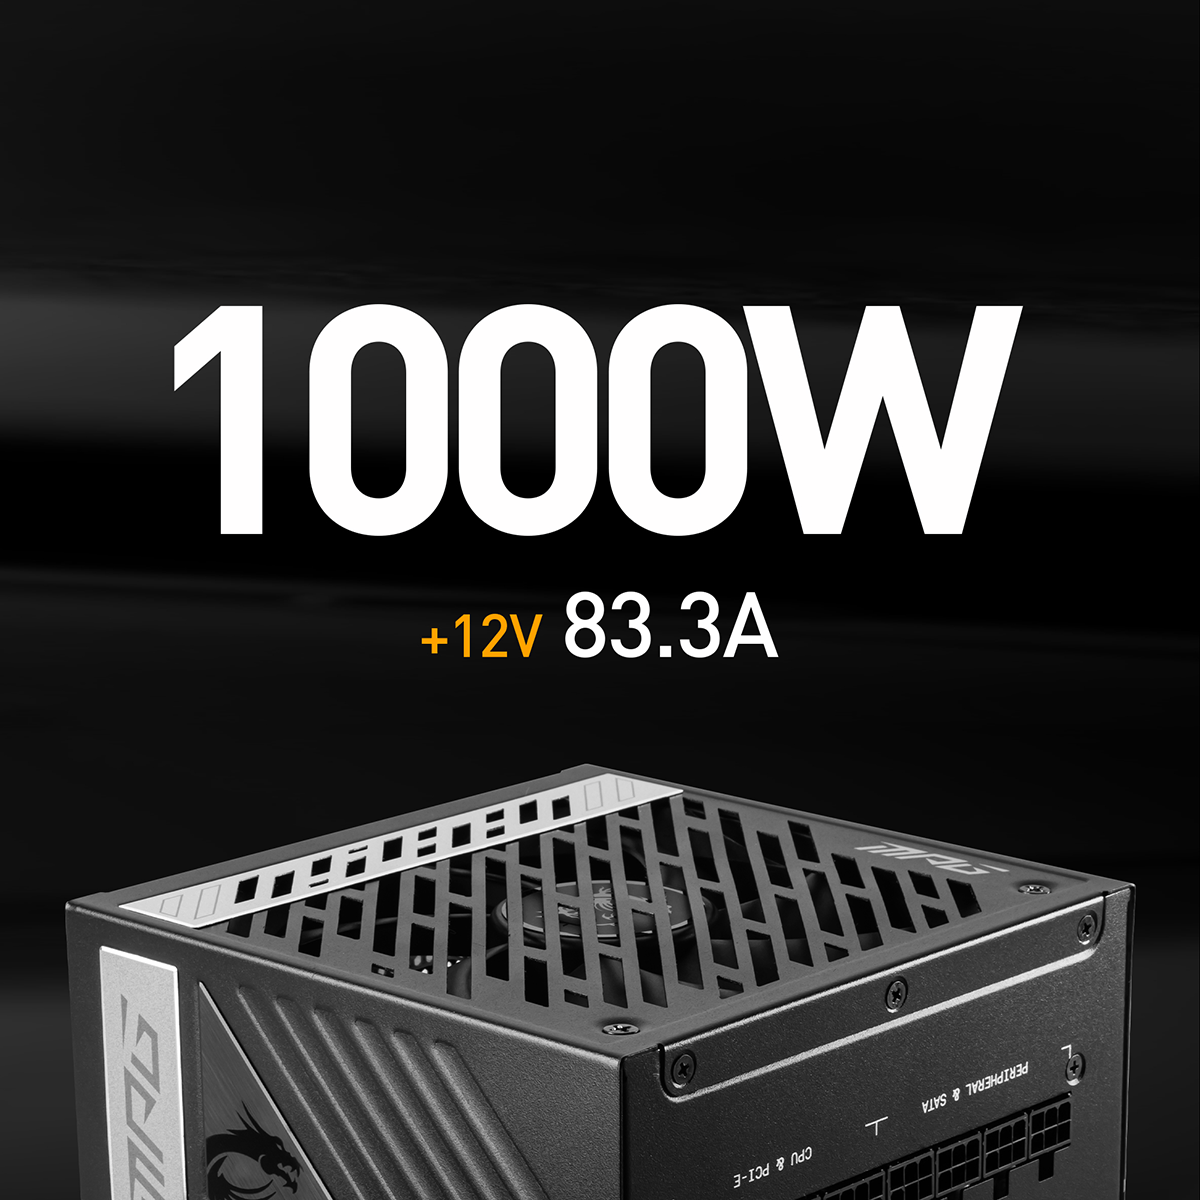 The MPG A1000G PCIE5 power supply